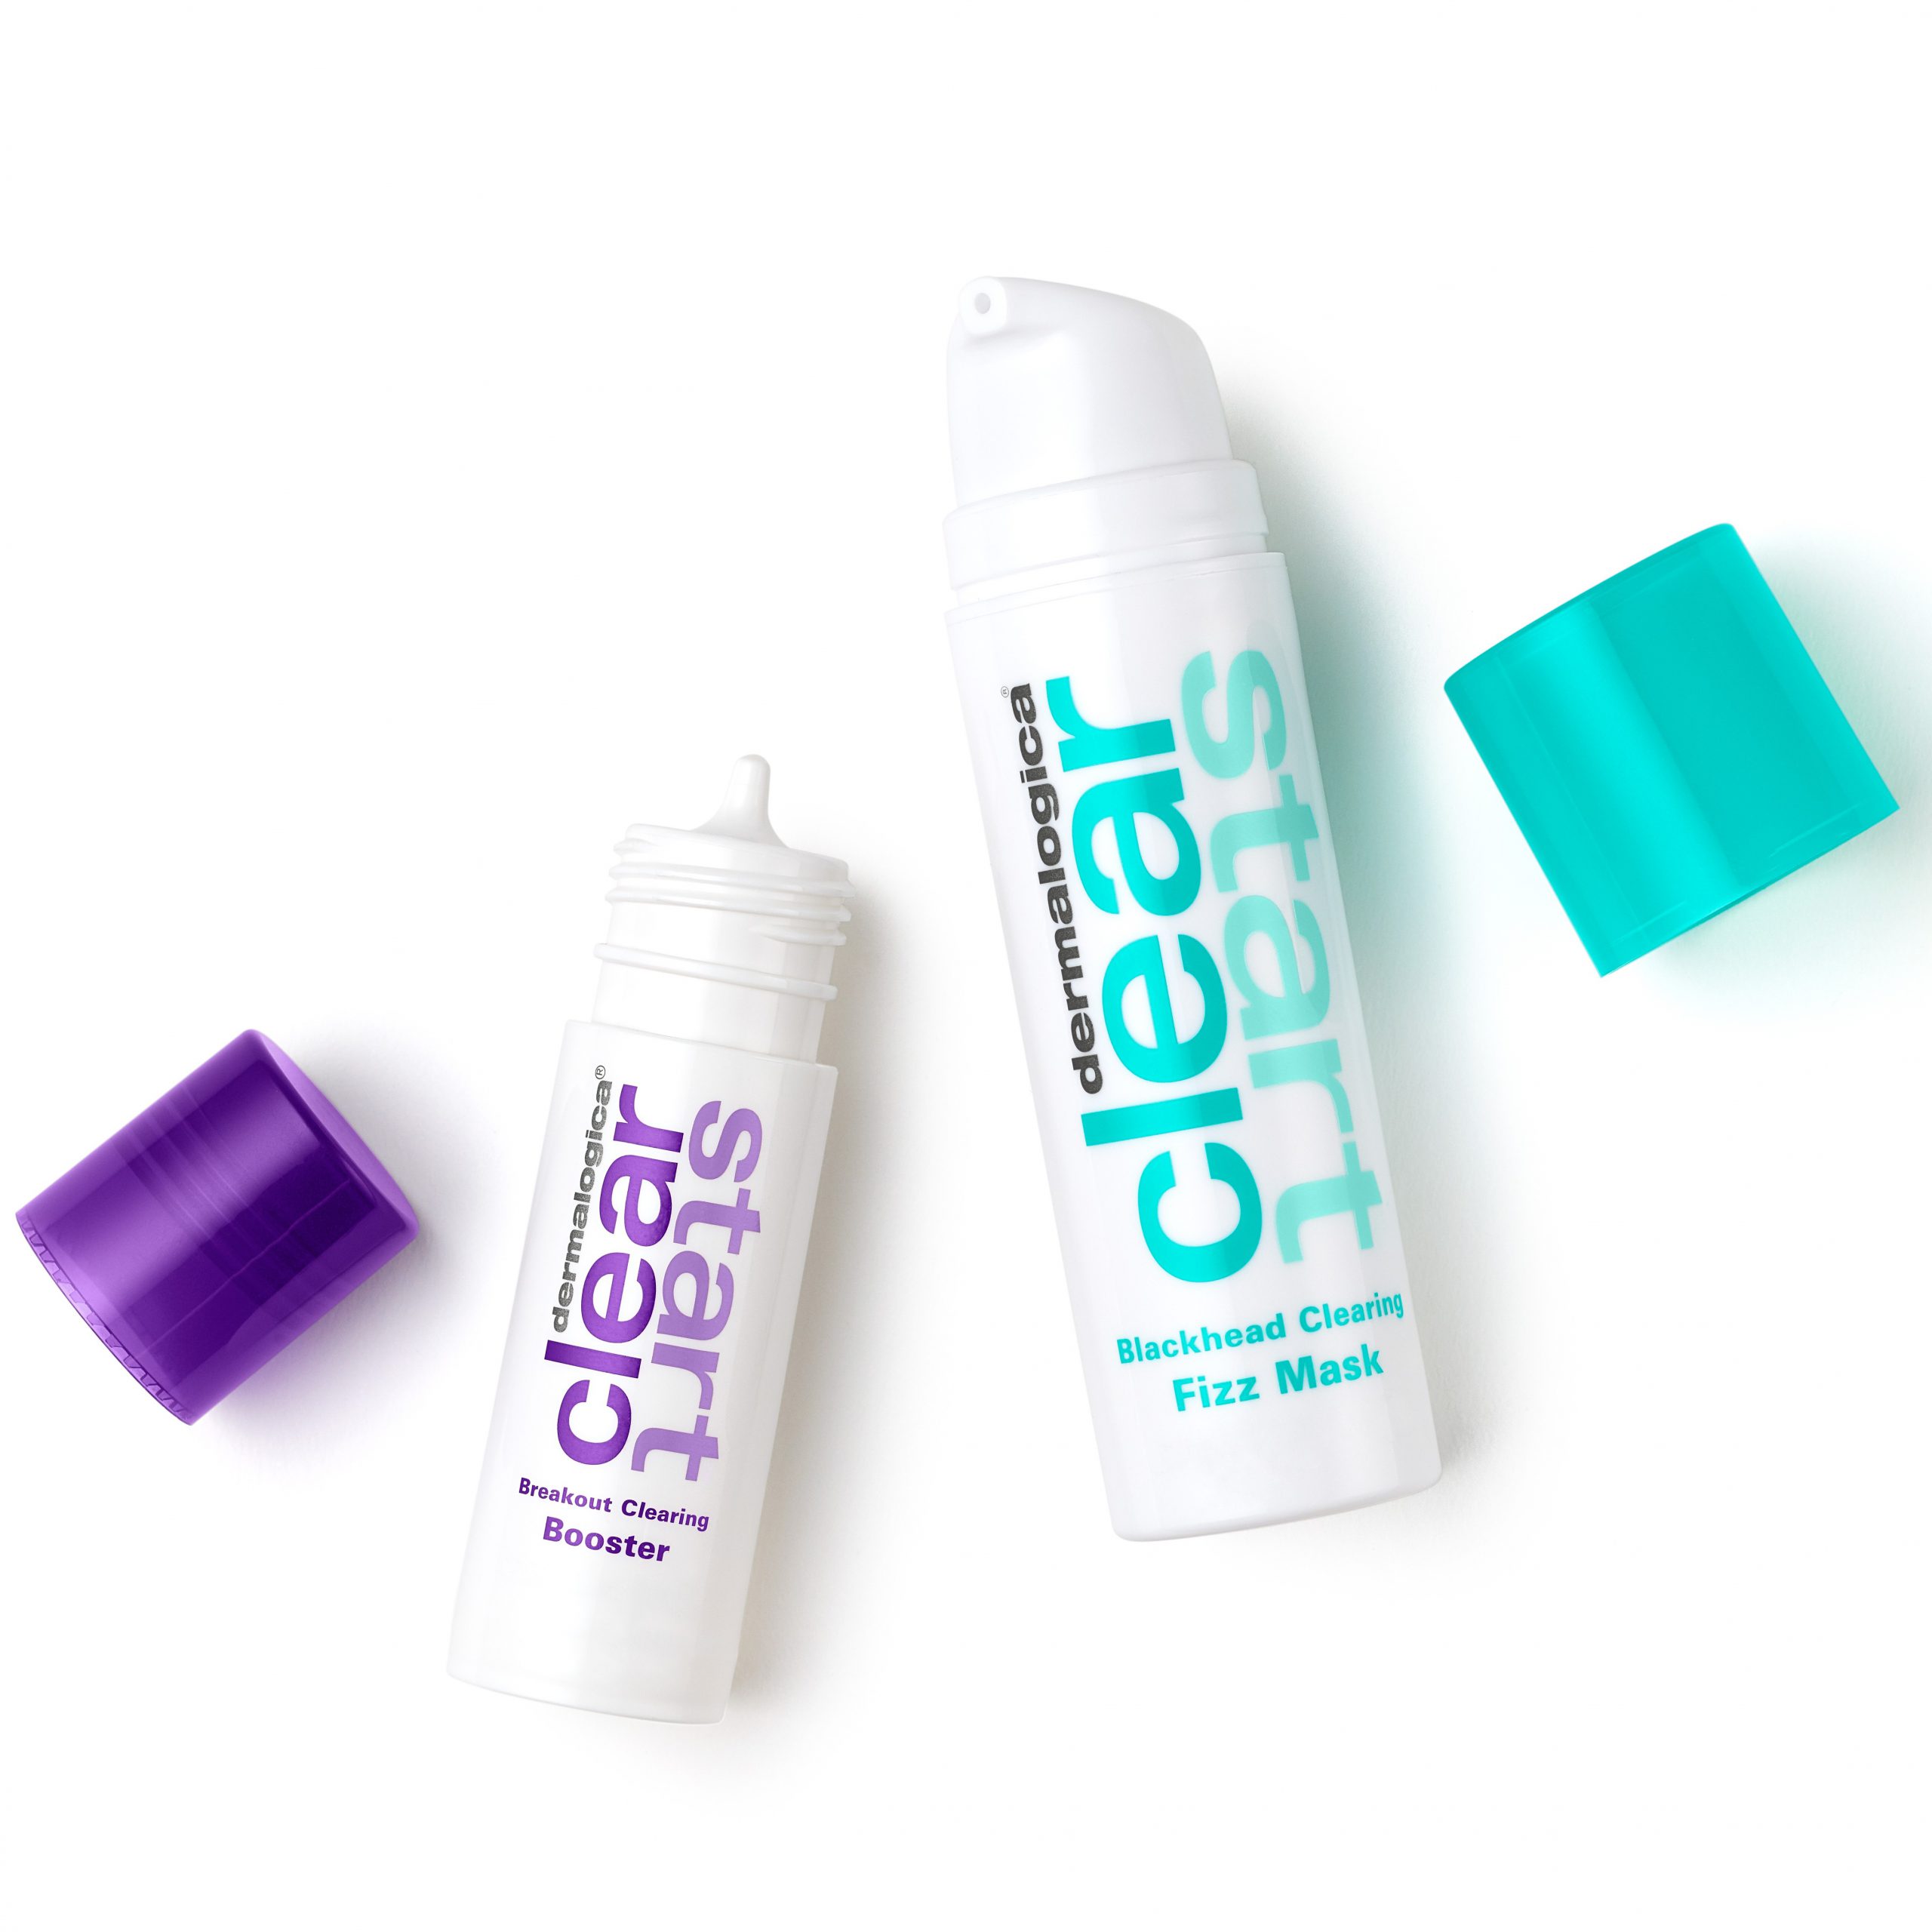 Banish Break-outs with our NEW Clear Start Breakout Clearing Booster and Blackhead Clearing Fizz Mask